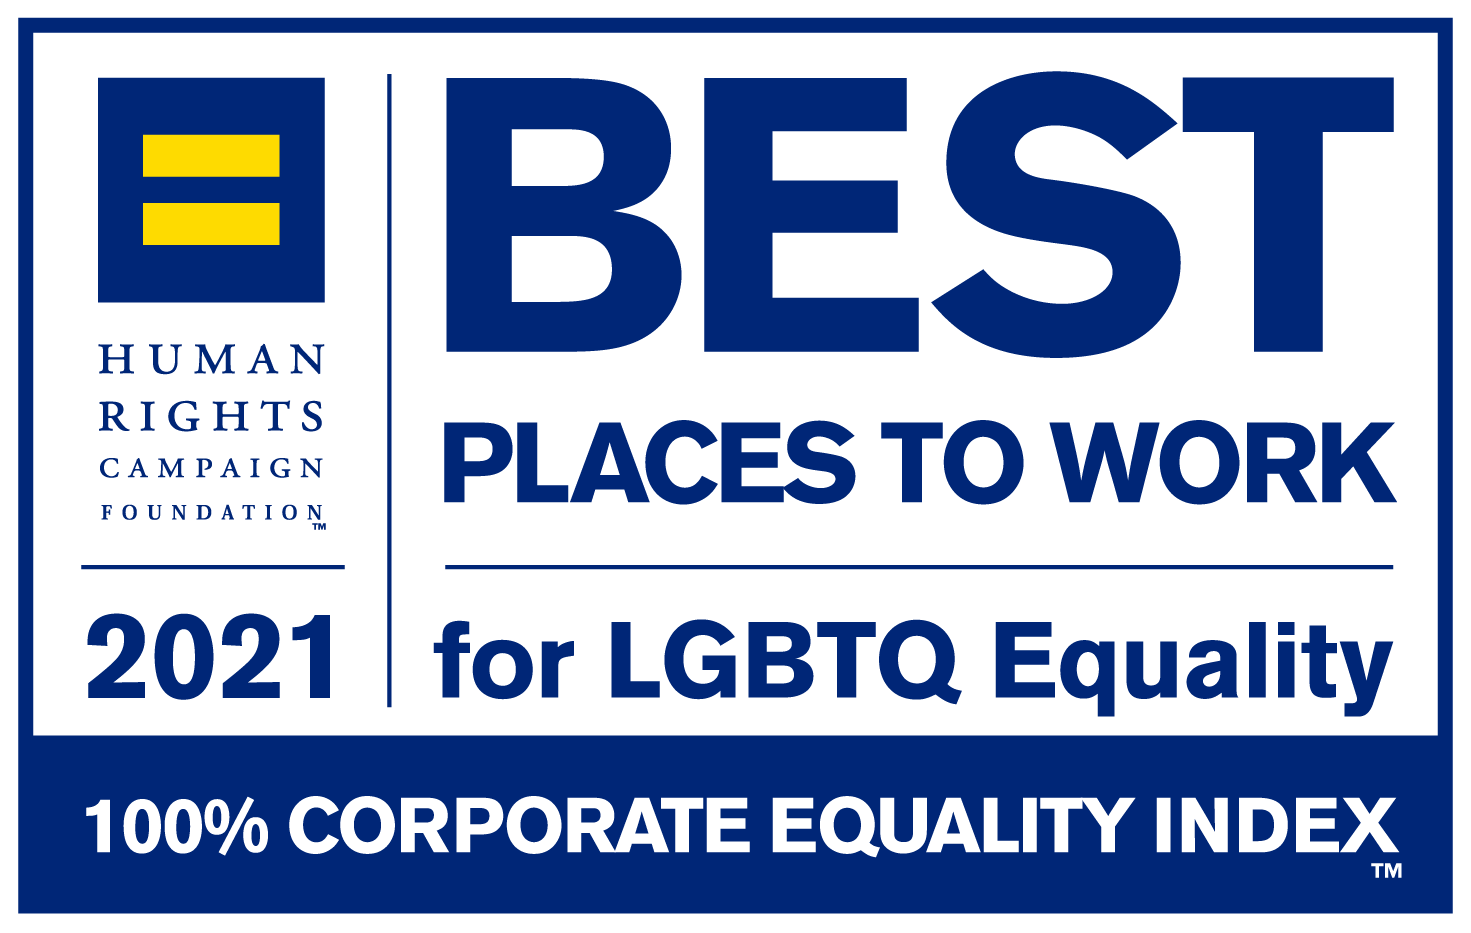 "Best Place to Work" 2021